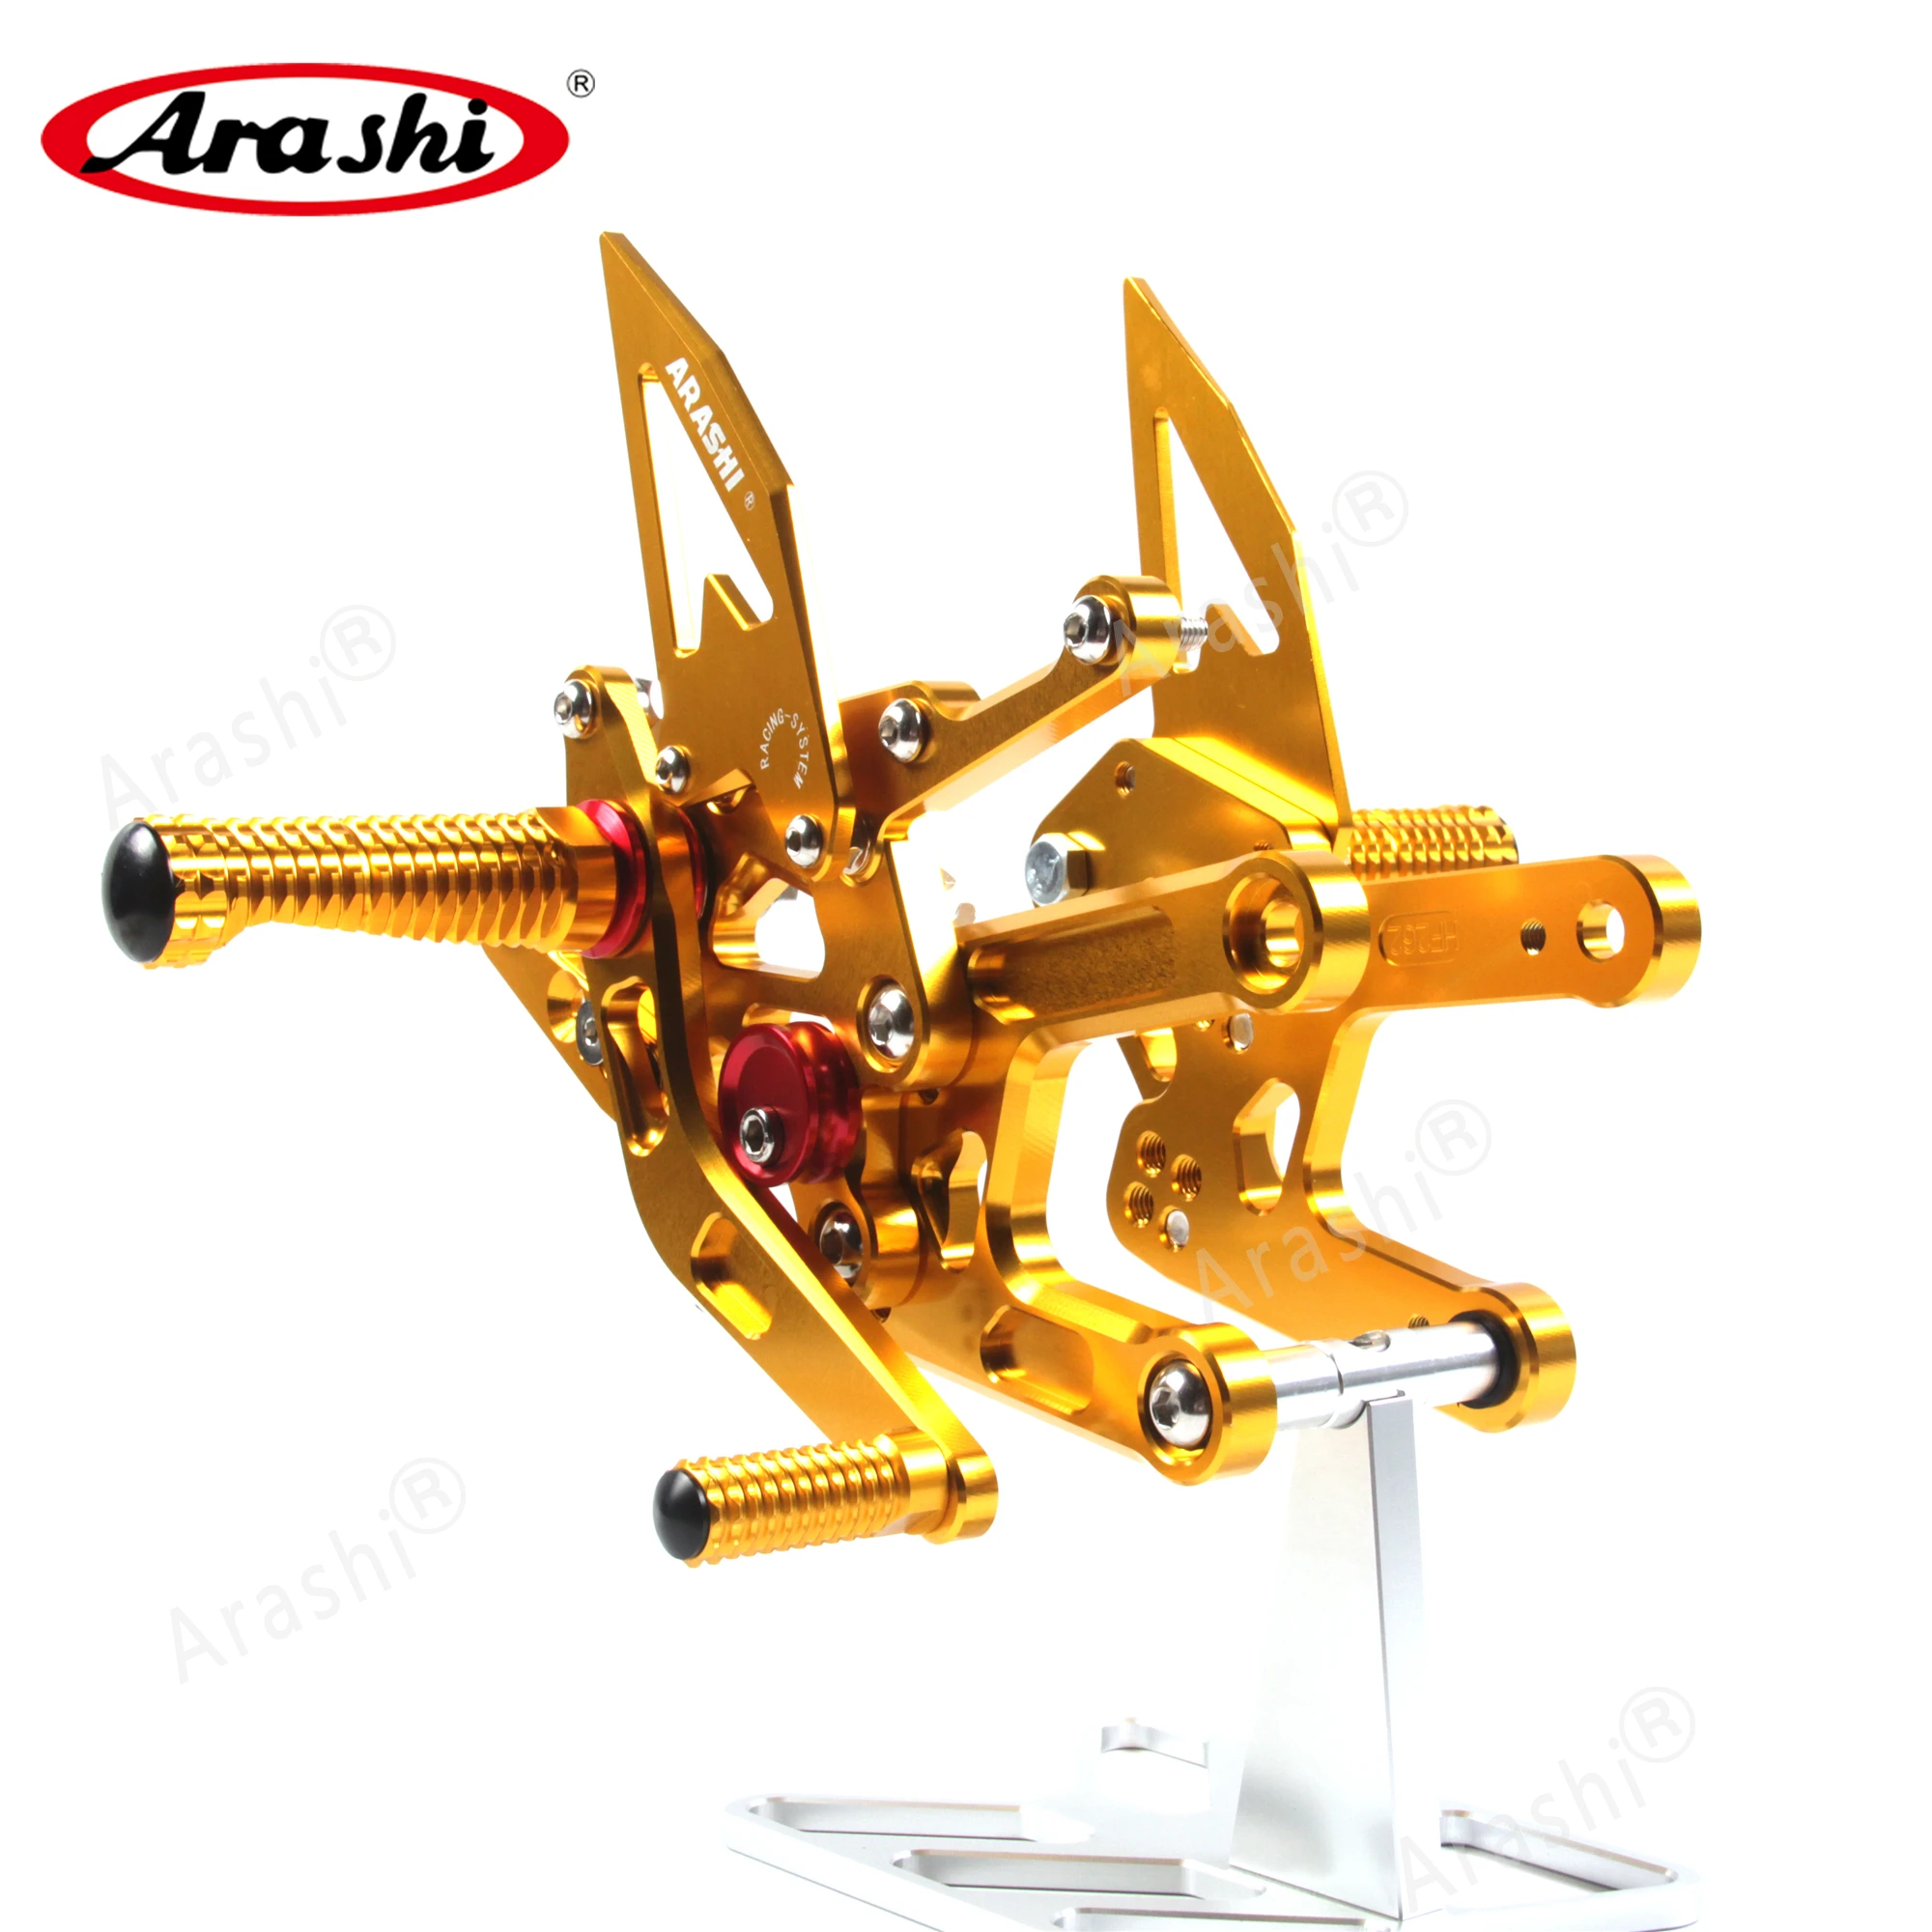 Arashi Rear Footrests Foot Rest Peg Passenger Pedal for YAMAHA YZF R6 2006-2016 Motorcycle CNC-Machined Accessories Gold 